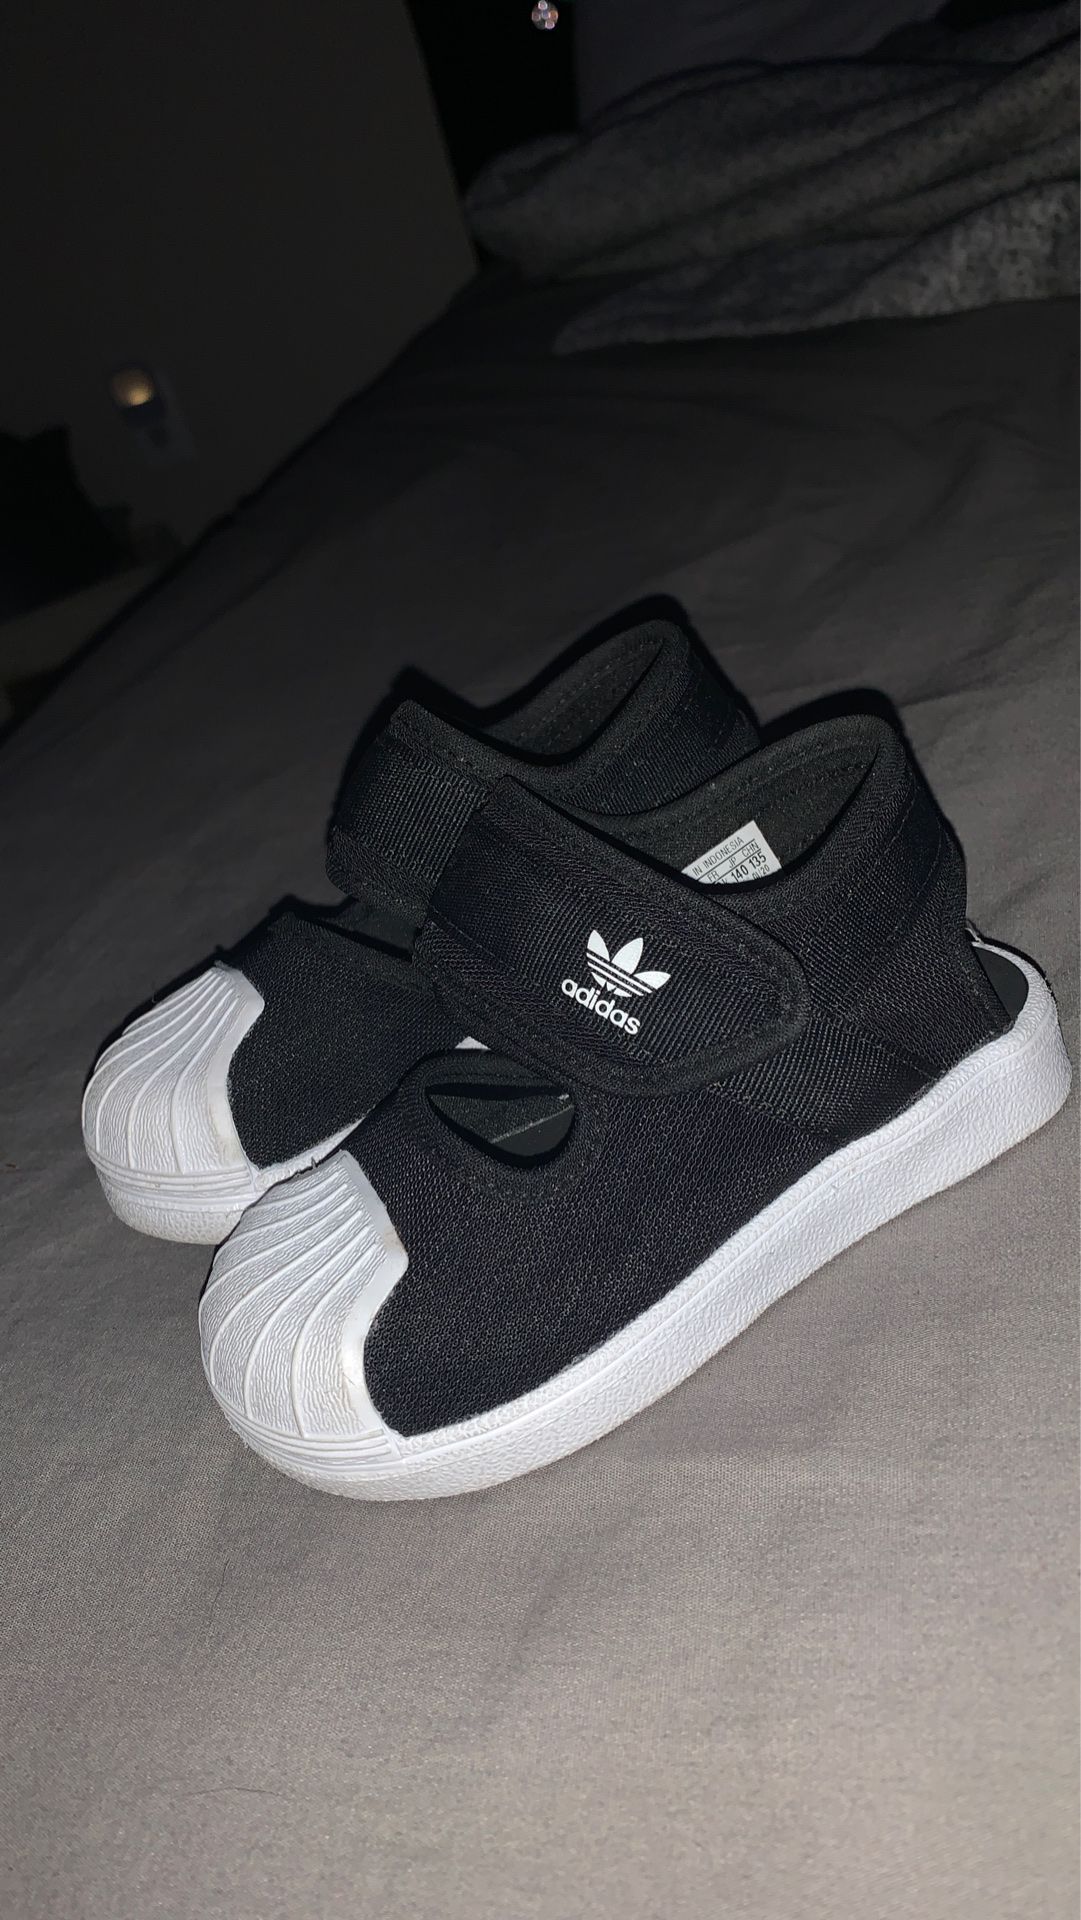 Toddlers Adidas Shoes (SIZE 7c)